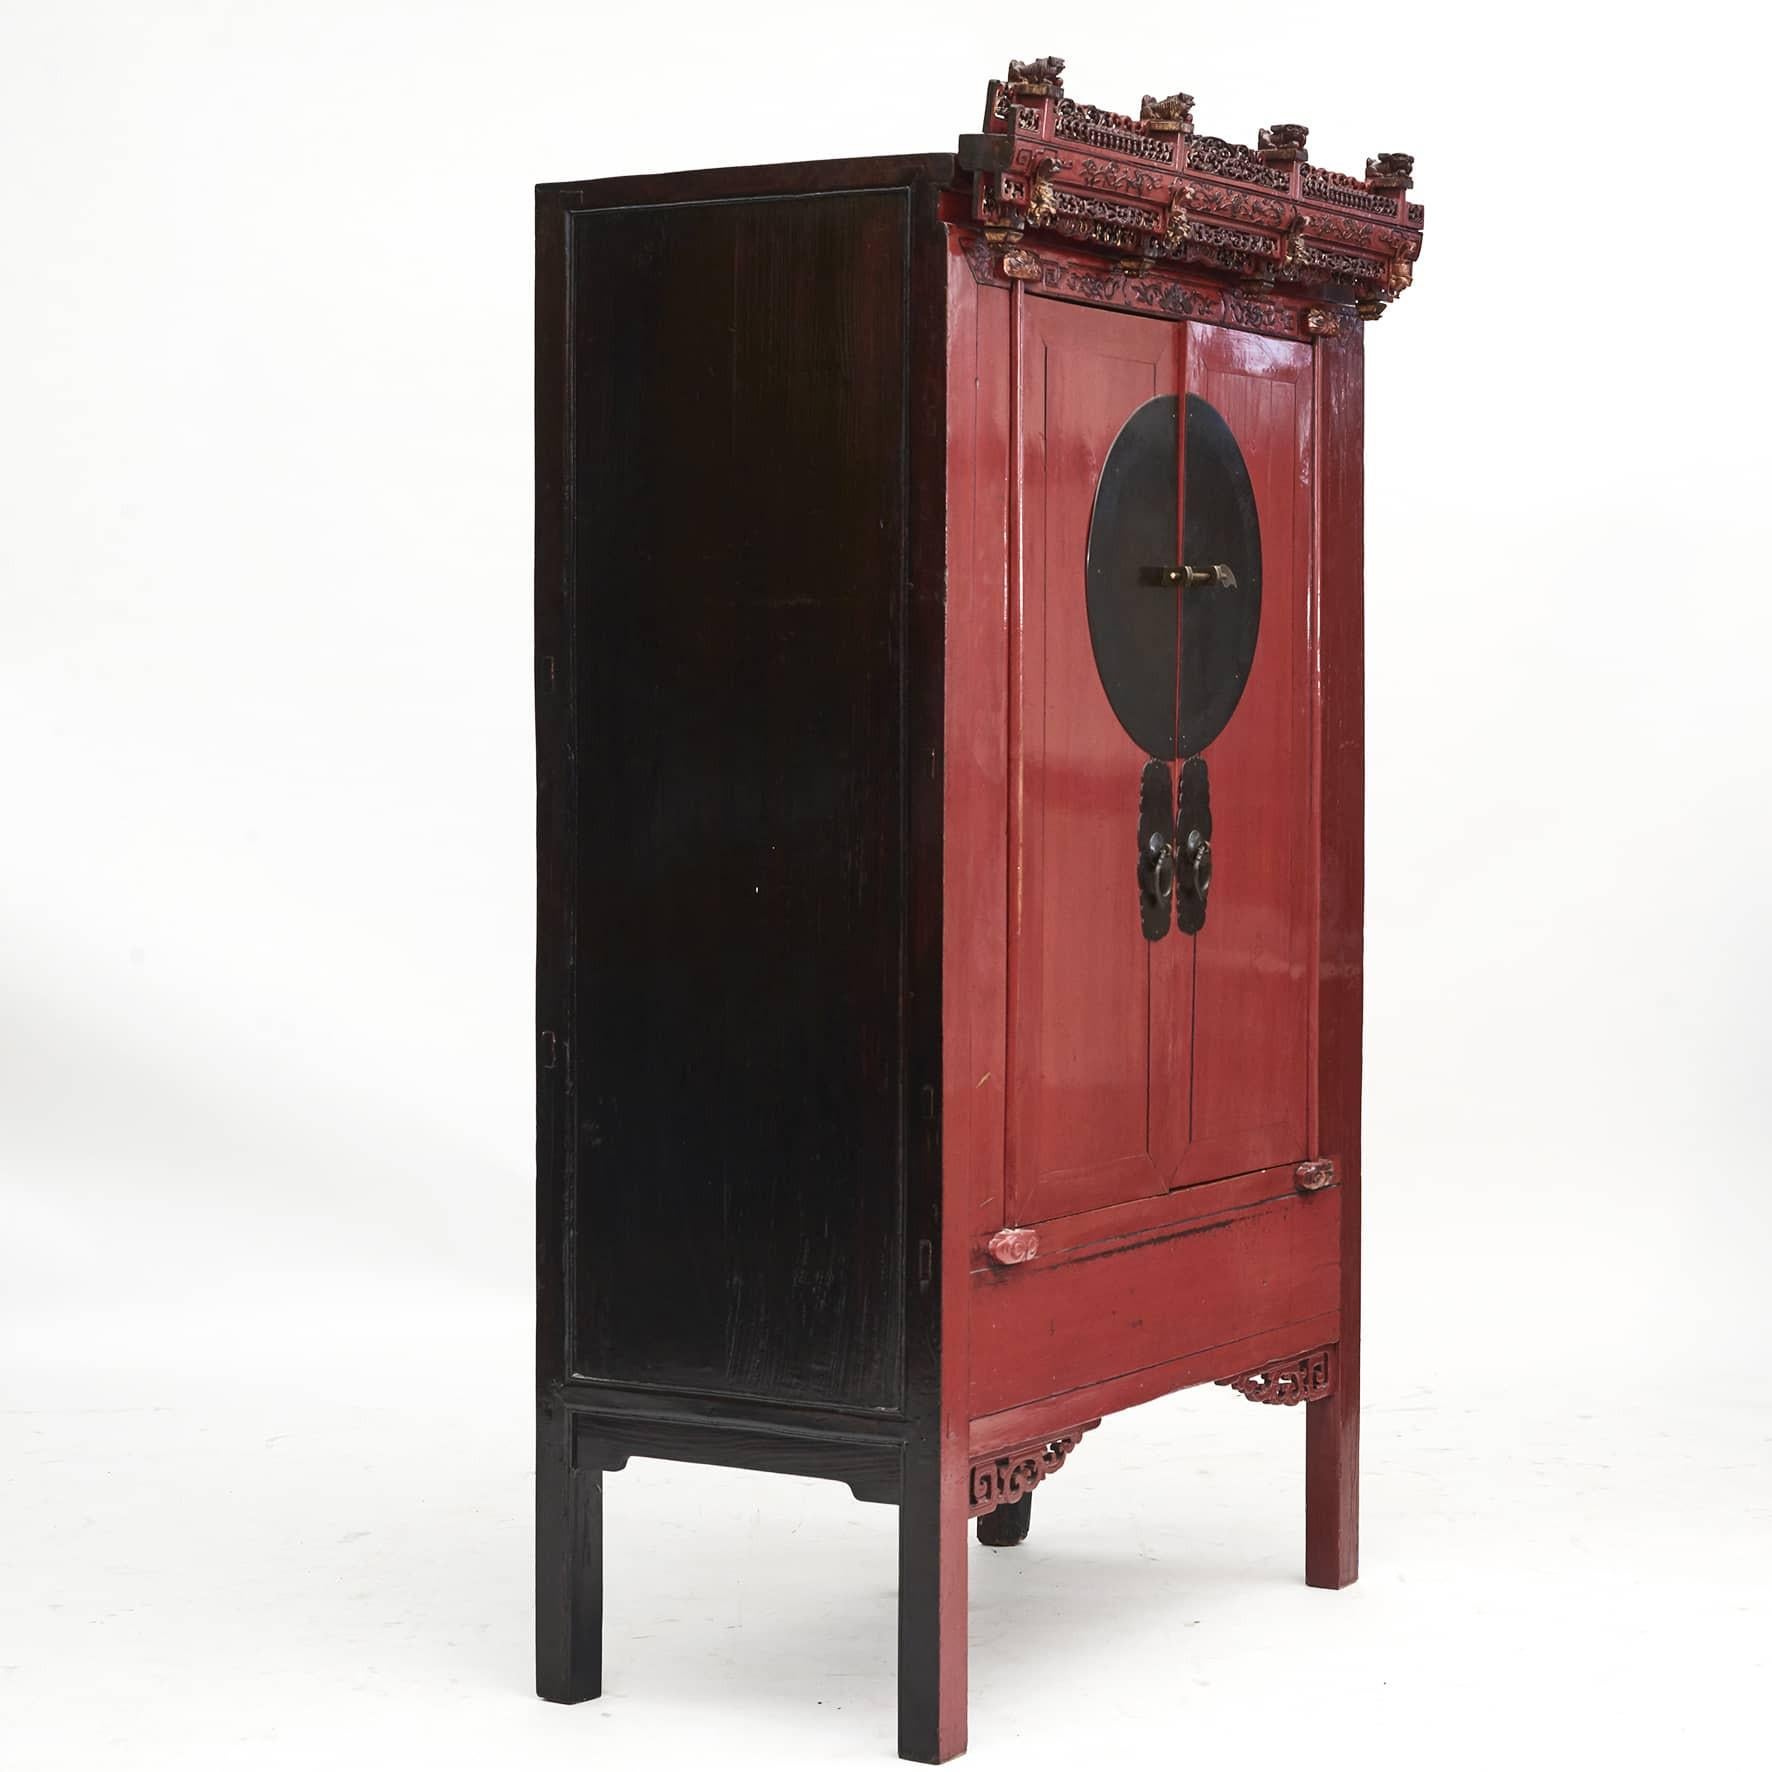 Chinese Qing dynasty red lacquer wedding armoire.
Top is richly carved with pierced foliate, crown is topped by 4 carved guardian lions, a classic decoration choise from the Fujian Province.
Very decorative cabinet in original condition from Fujian